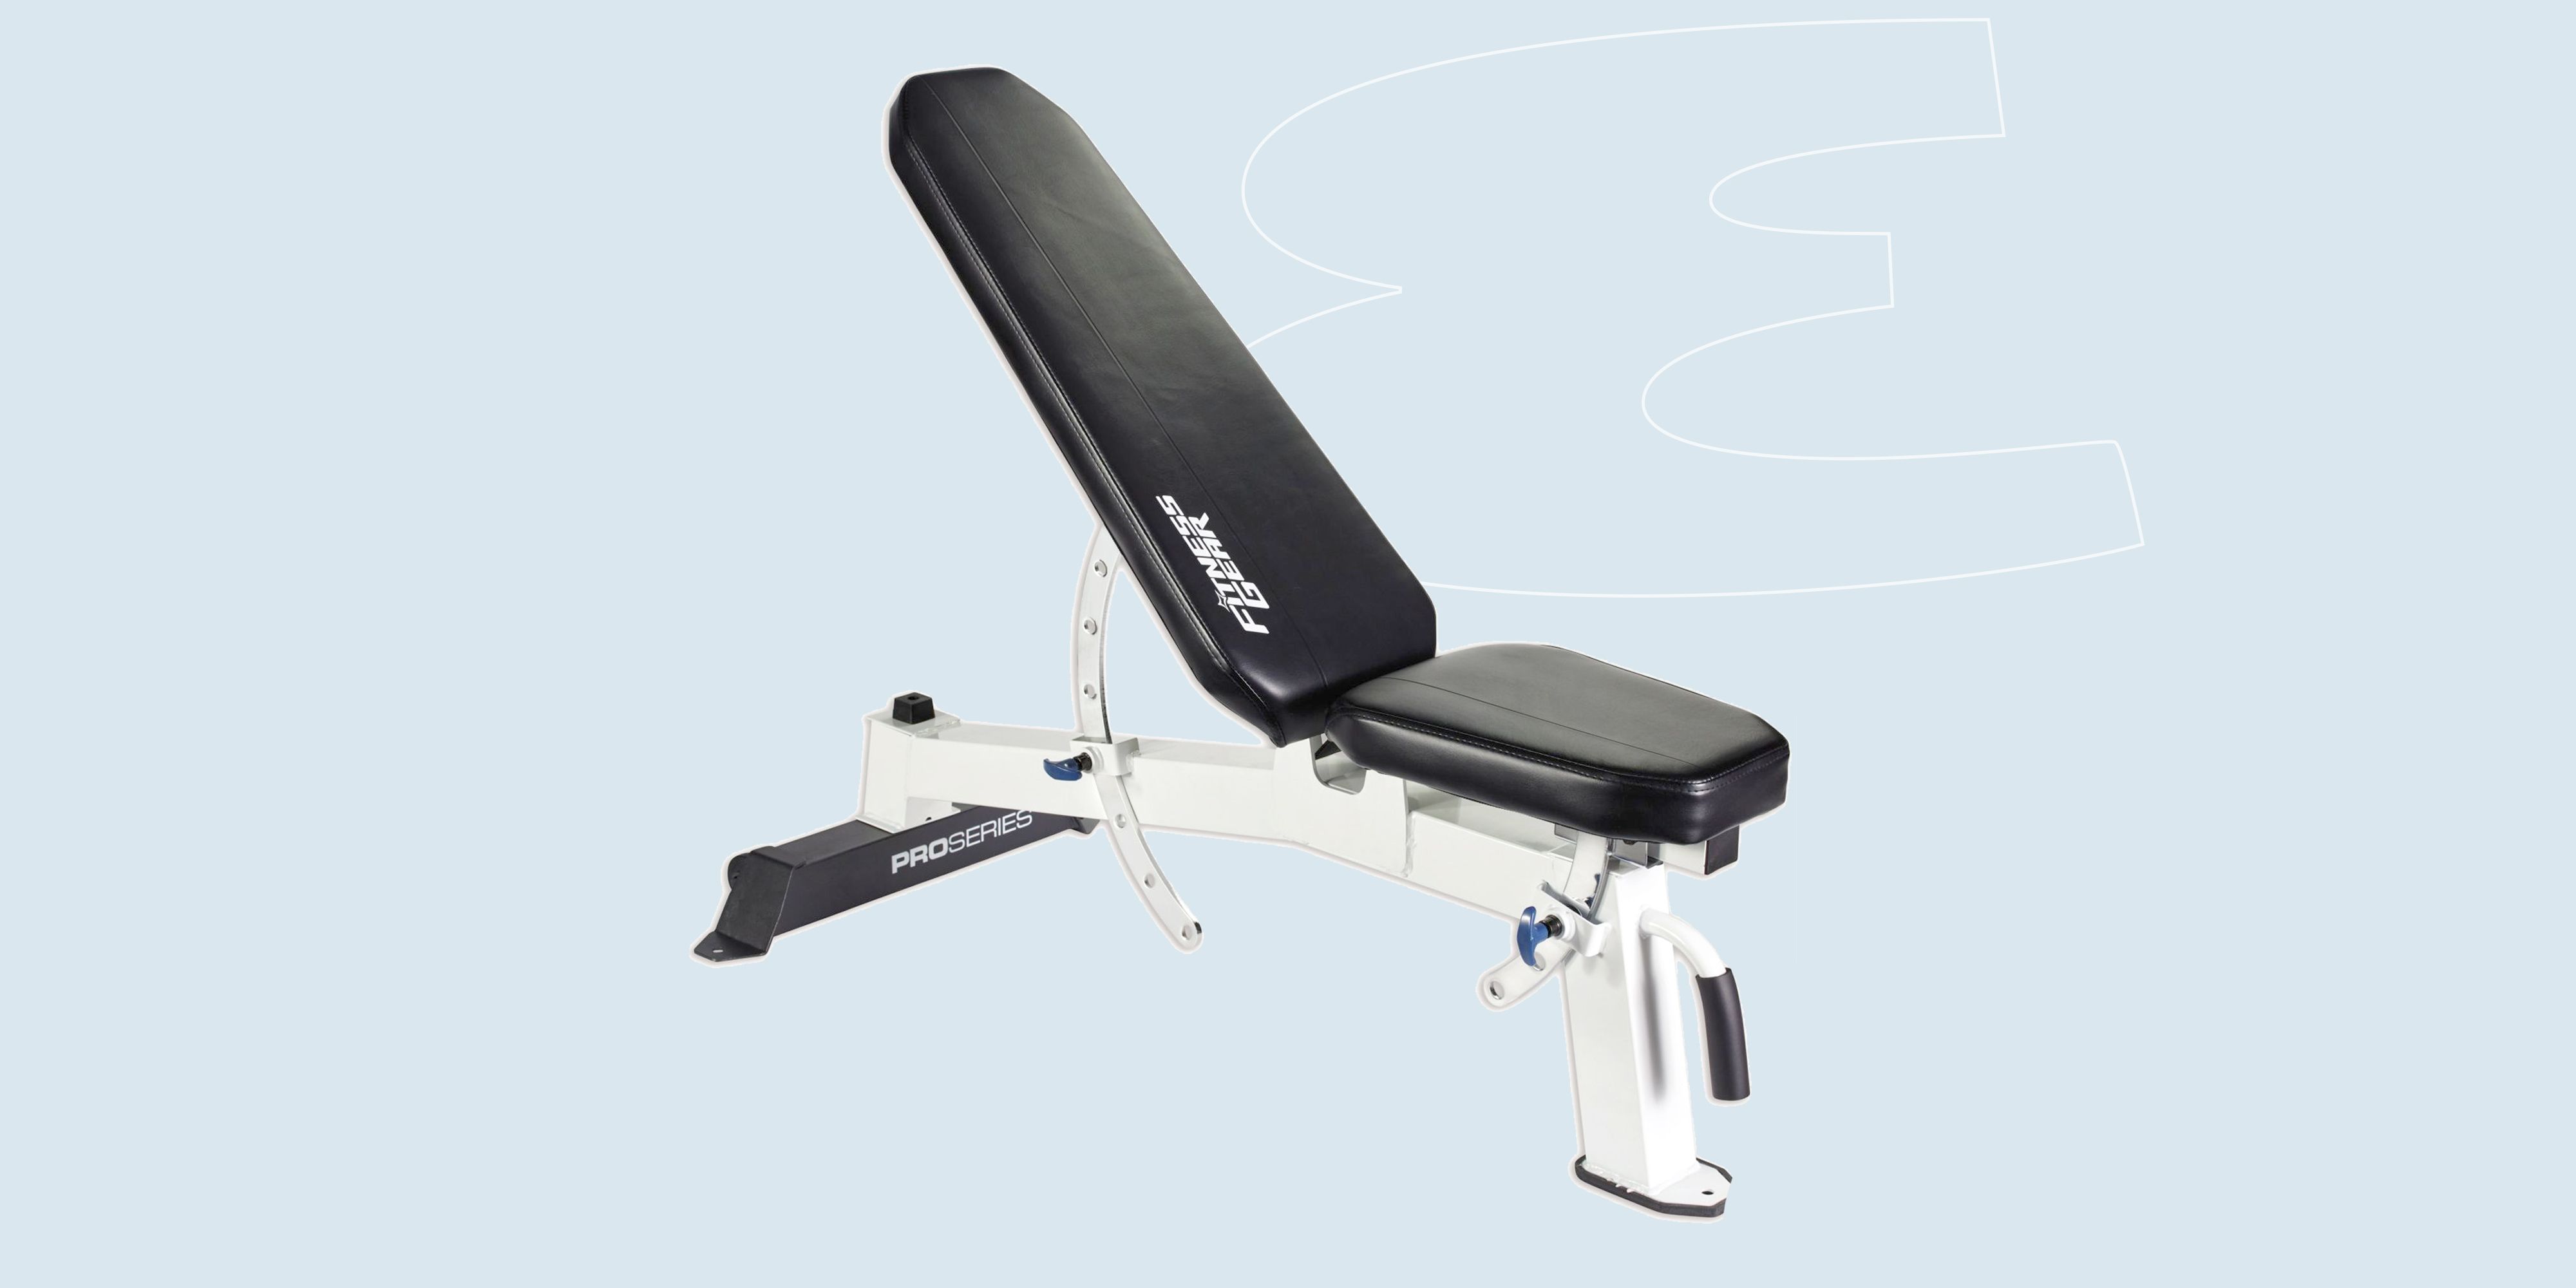 Technogym bench: the home workout bench